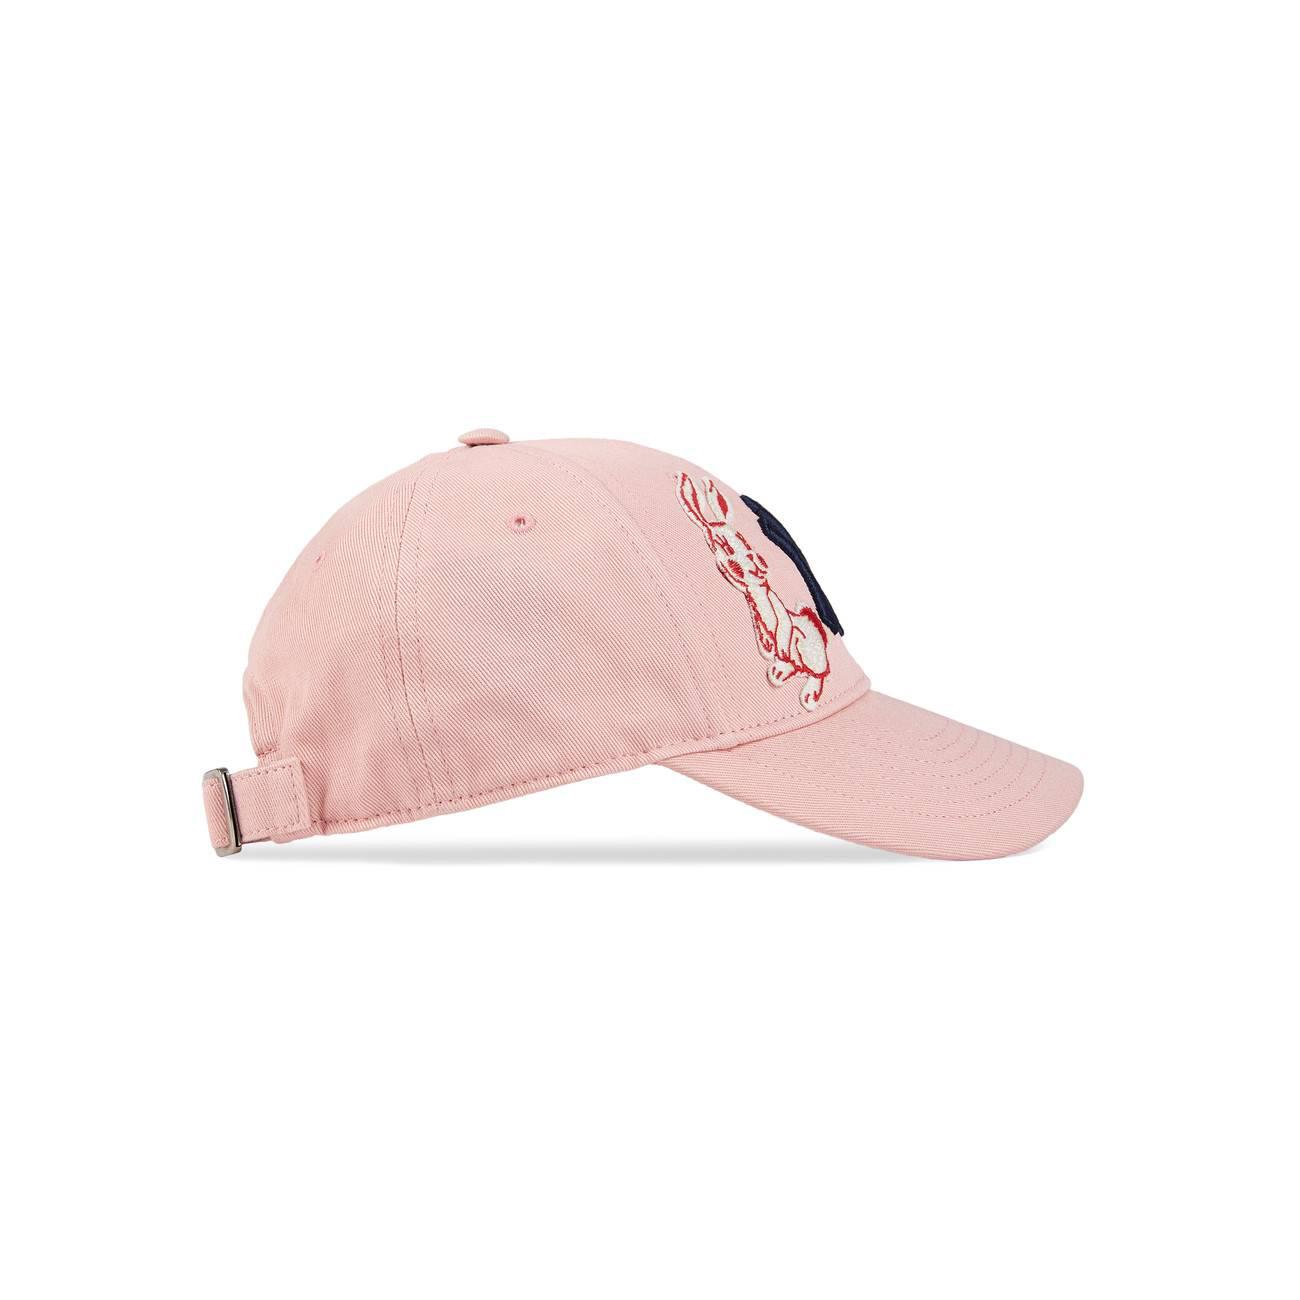 Gucci Cotton Baseball Cap With Ny Yankeestm Patch in Pink - Lyst